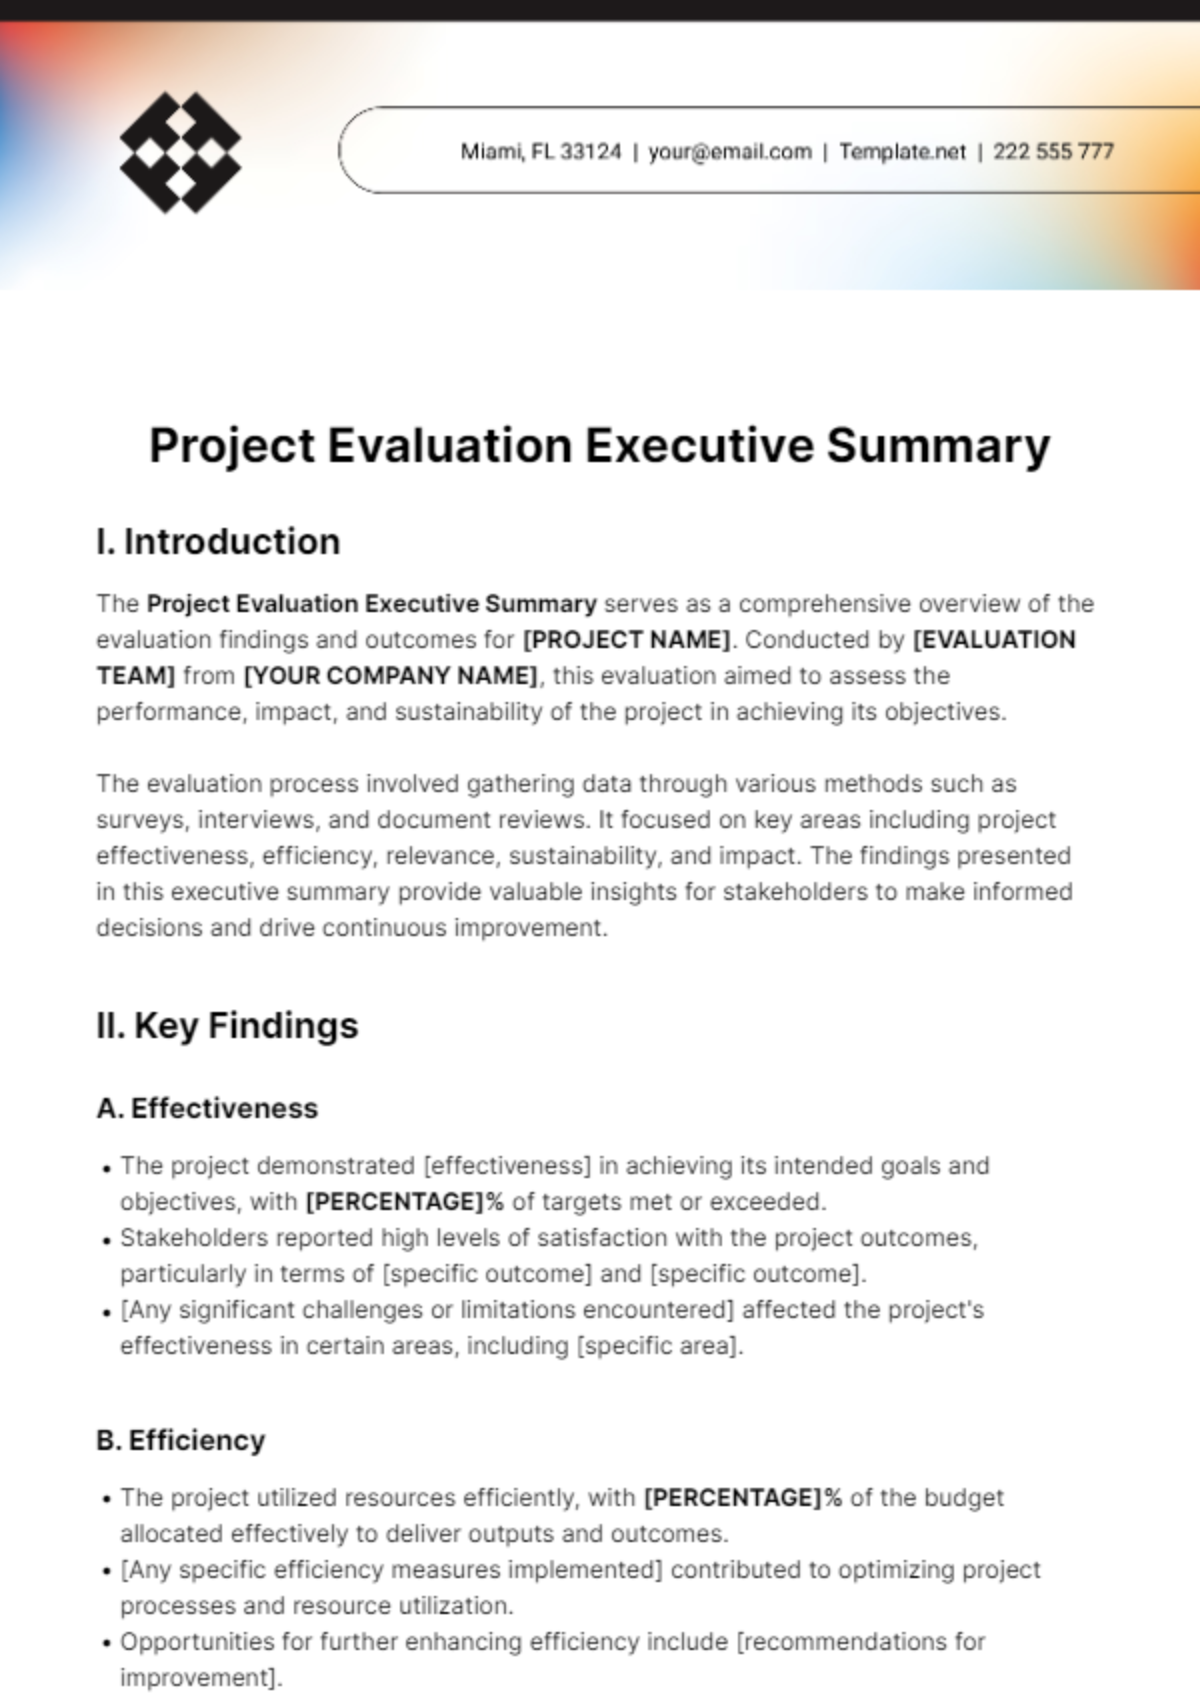 Project Evaluation Executive Summary Template